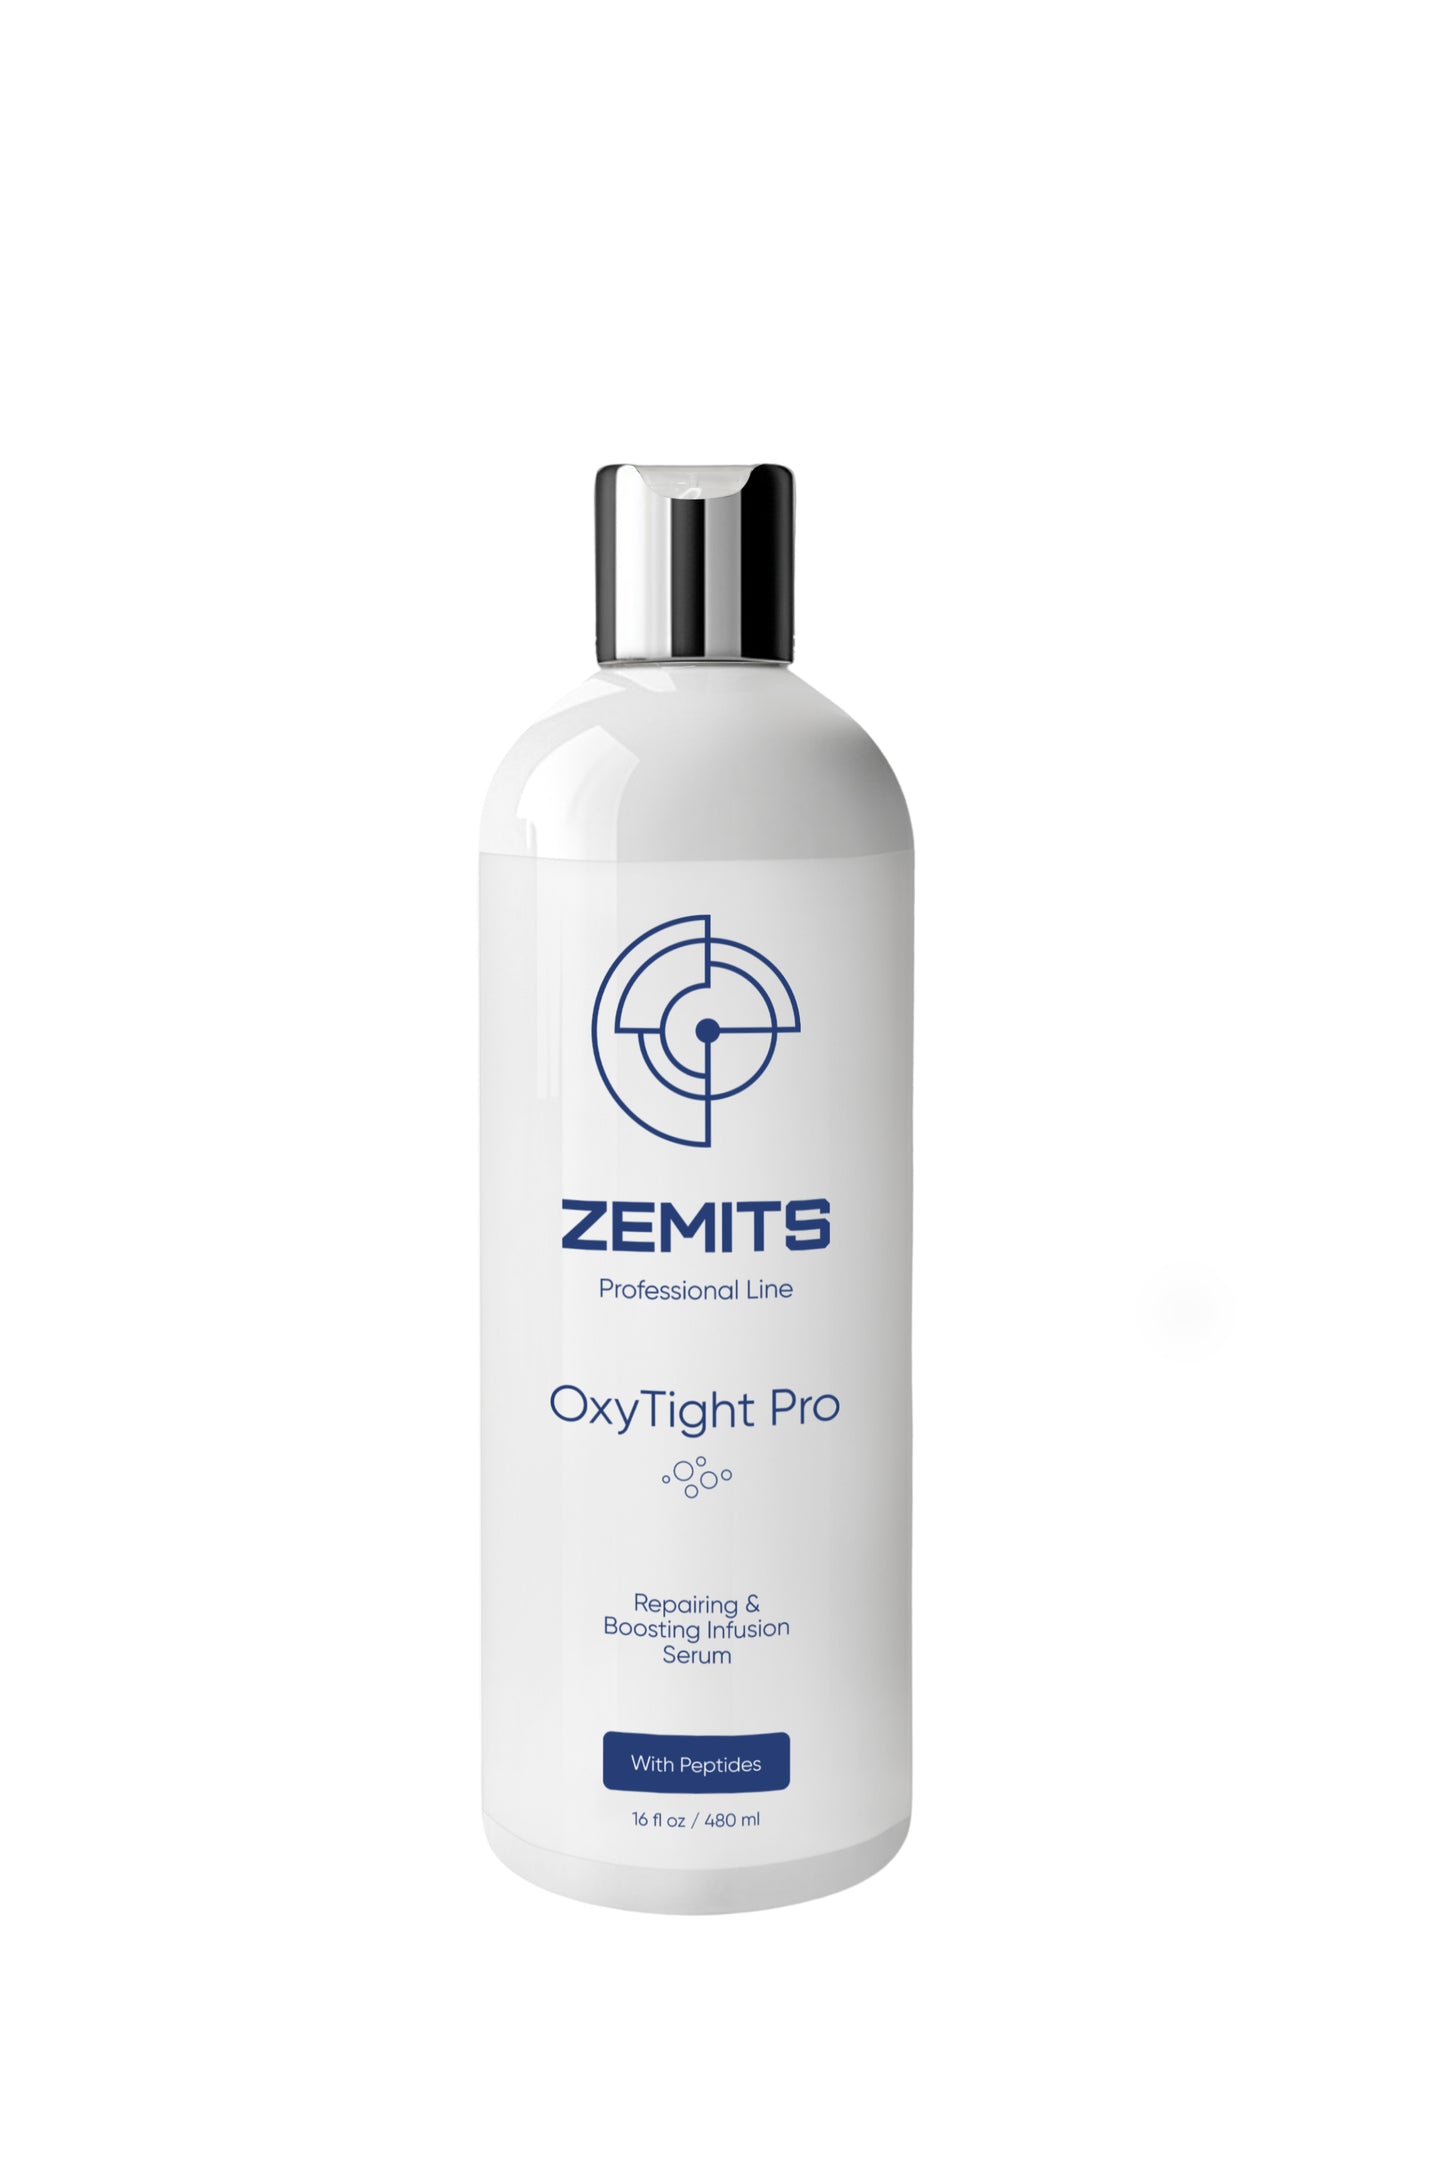 Zemits OxyTight Pro Repairing & Boosting Infusion Serum with Peptides, 16 fl oz